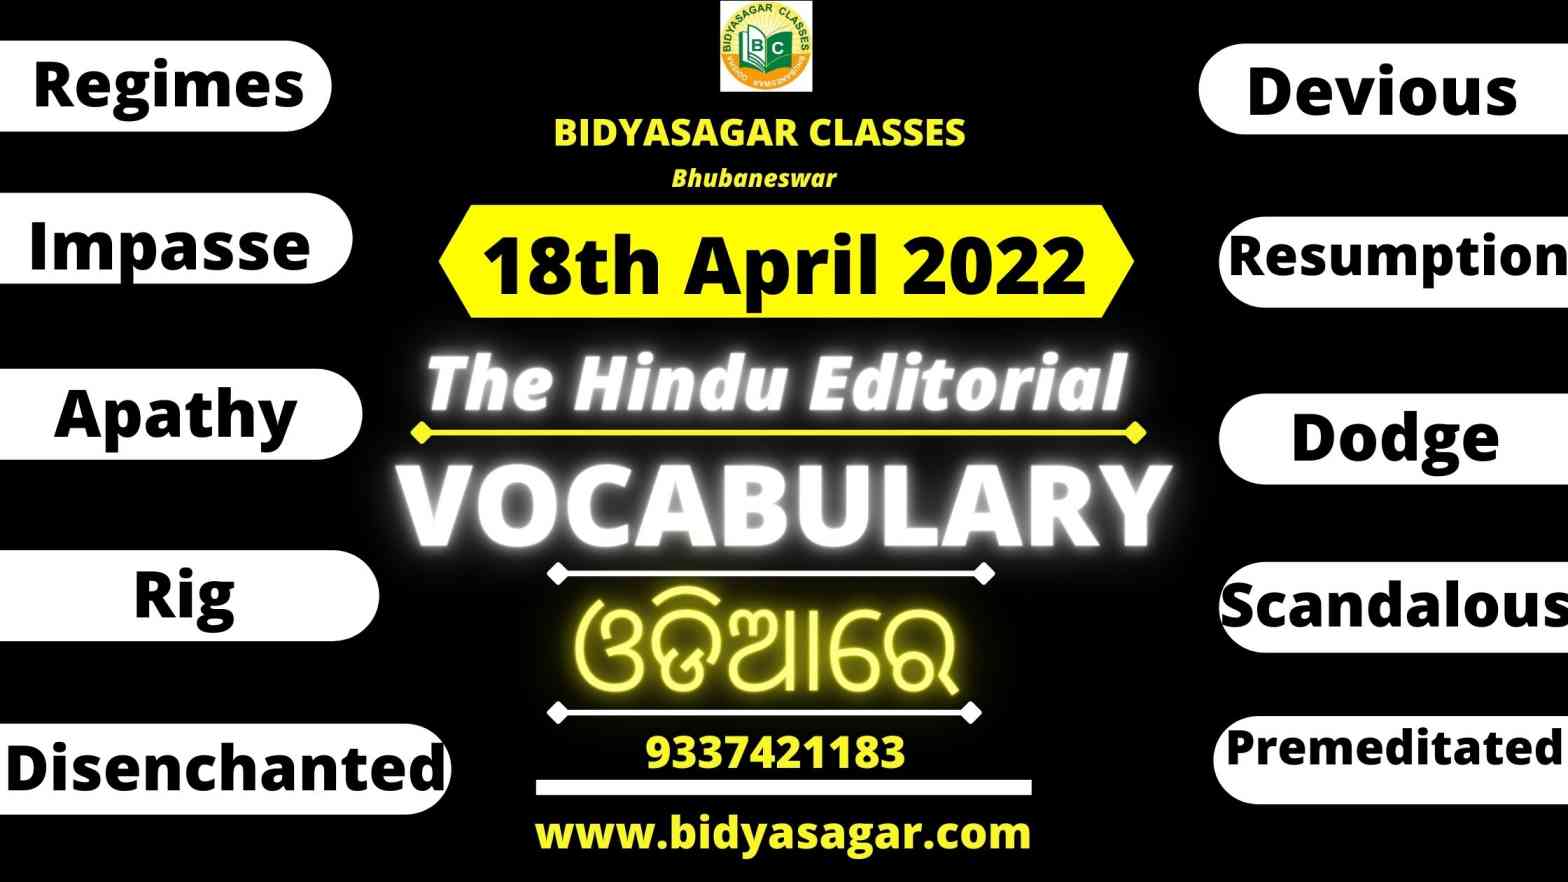 The Hindu Editorial Vocabulary of 18th April 2022